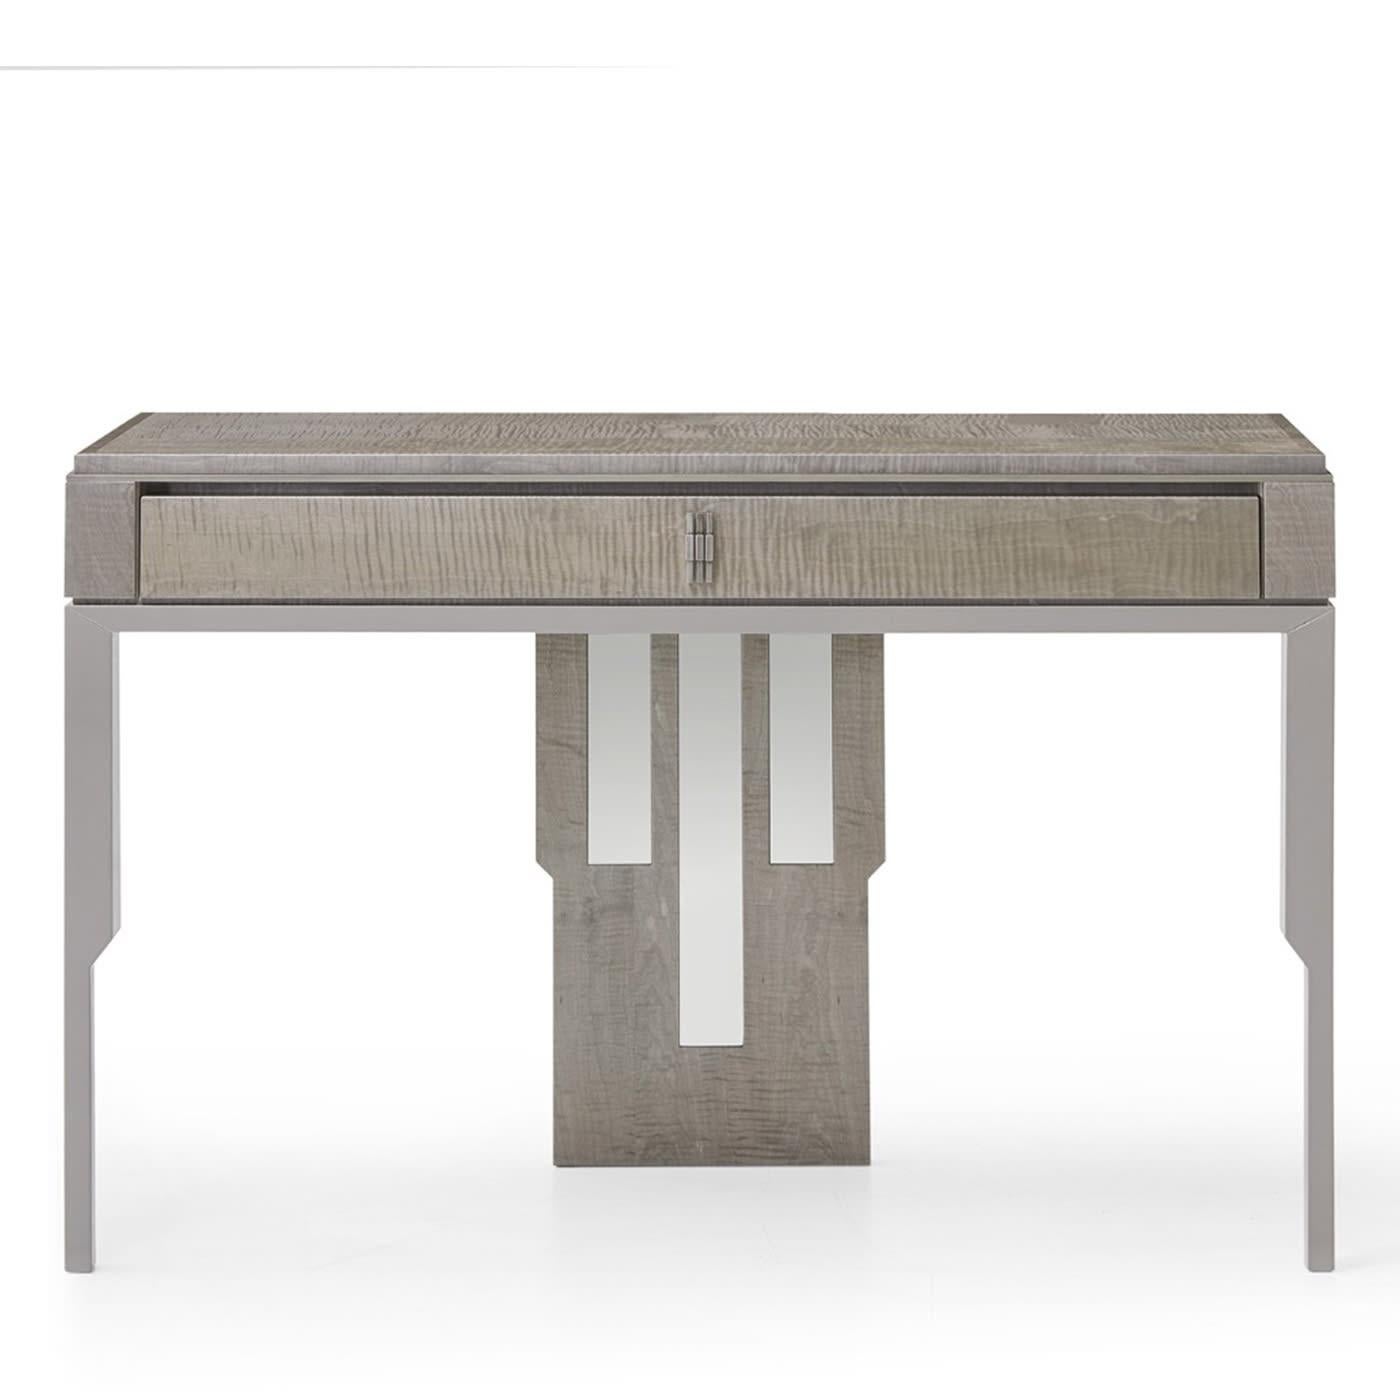 Fashioned of prized fiddleback sycamore enhanced by a glossy transparent finish, this console is sure to capture the eye with its rigorously sculpted silhouette rich in geometric influences. Nickel-finished metal profiles combine with mirrored-glass